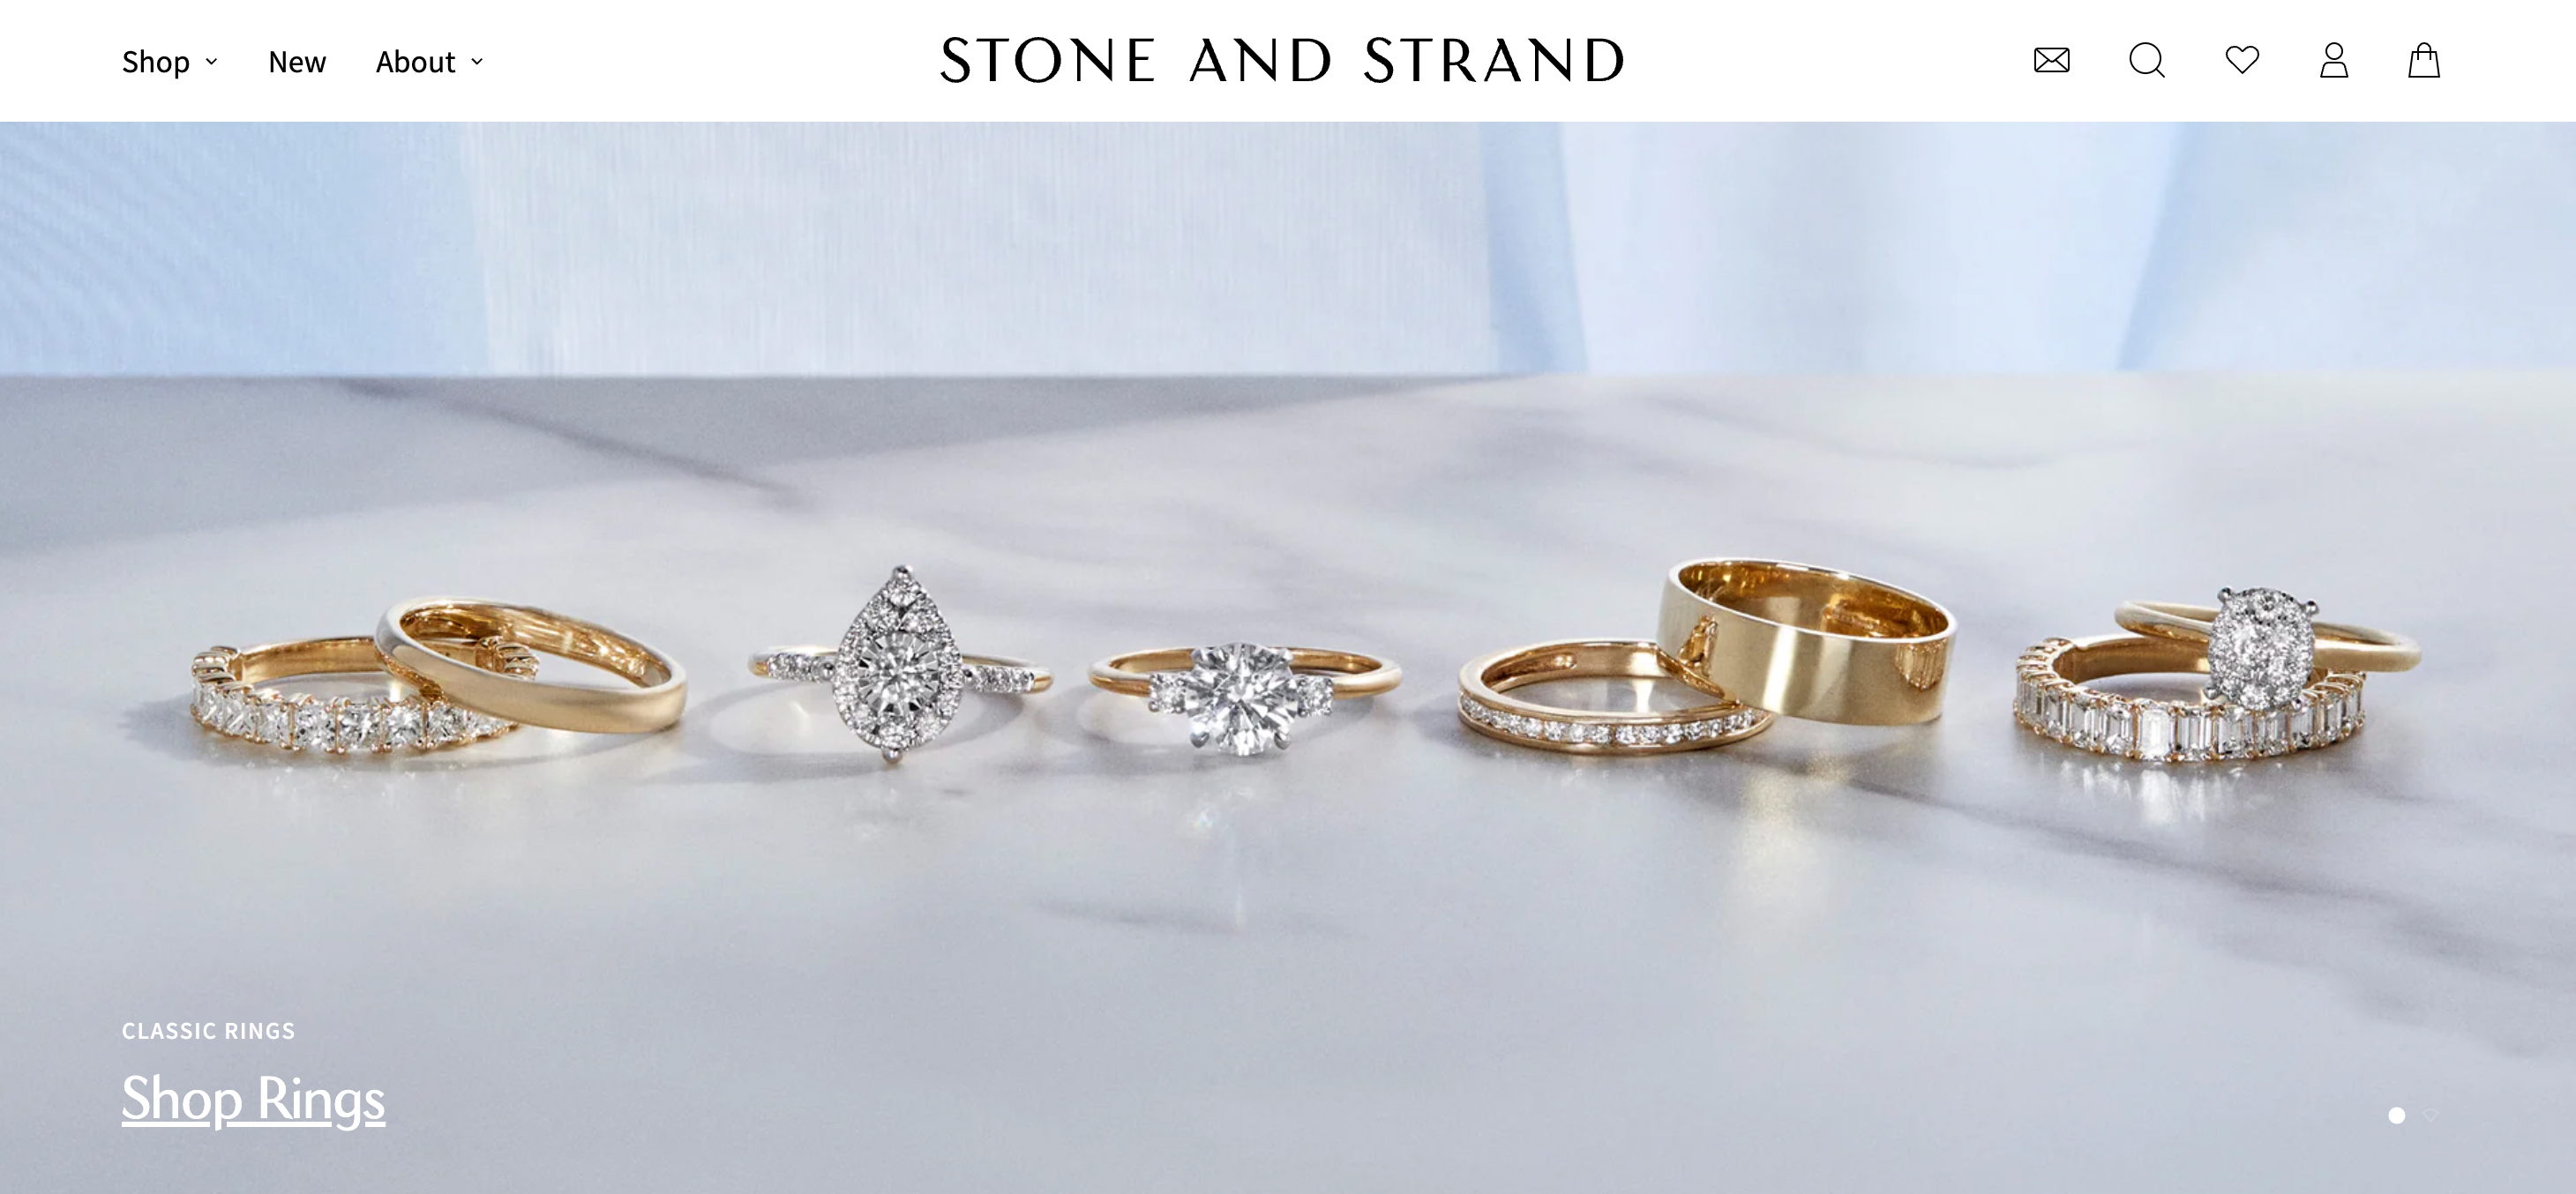 On Stone and Strand's homepage, various rings sit atop a white surface